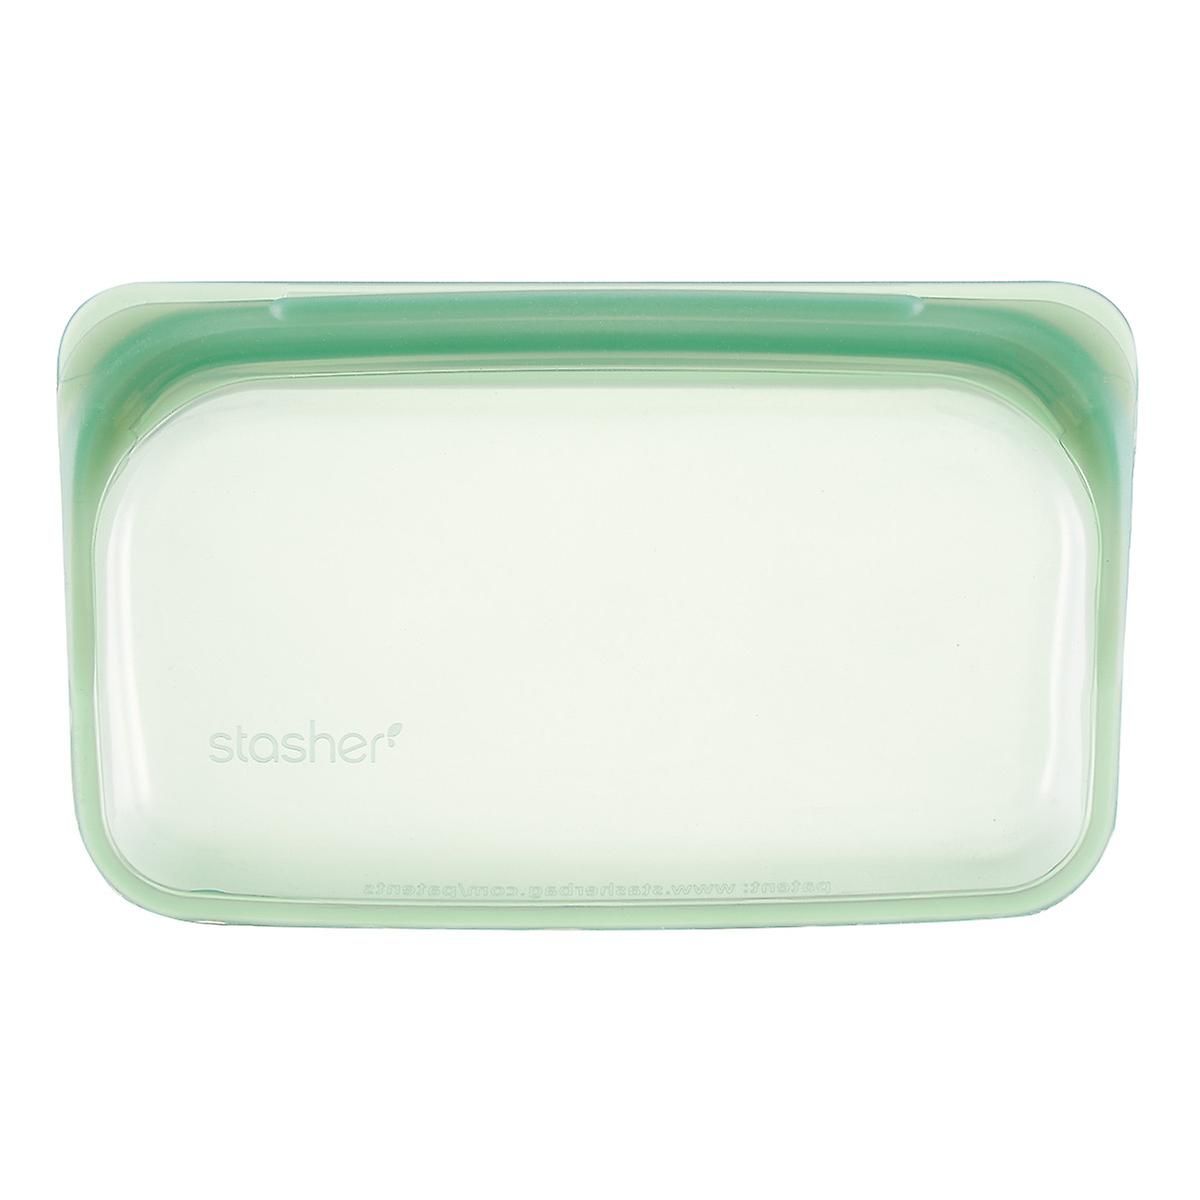 Stasher Agave Silicone Reusable Storage Bag | The Container Store